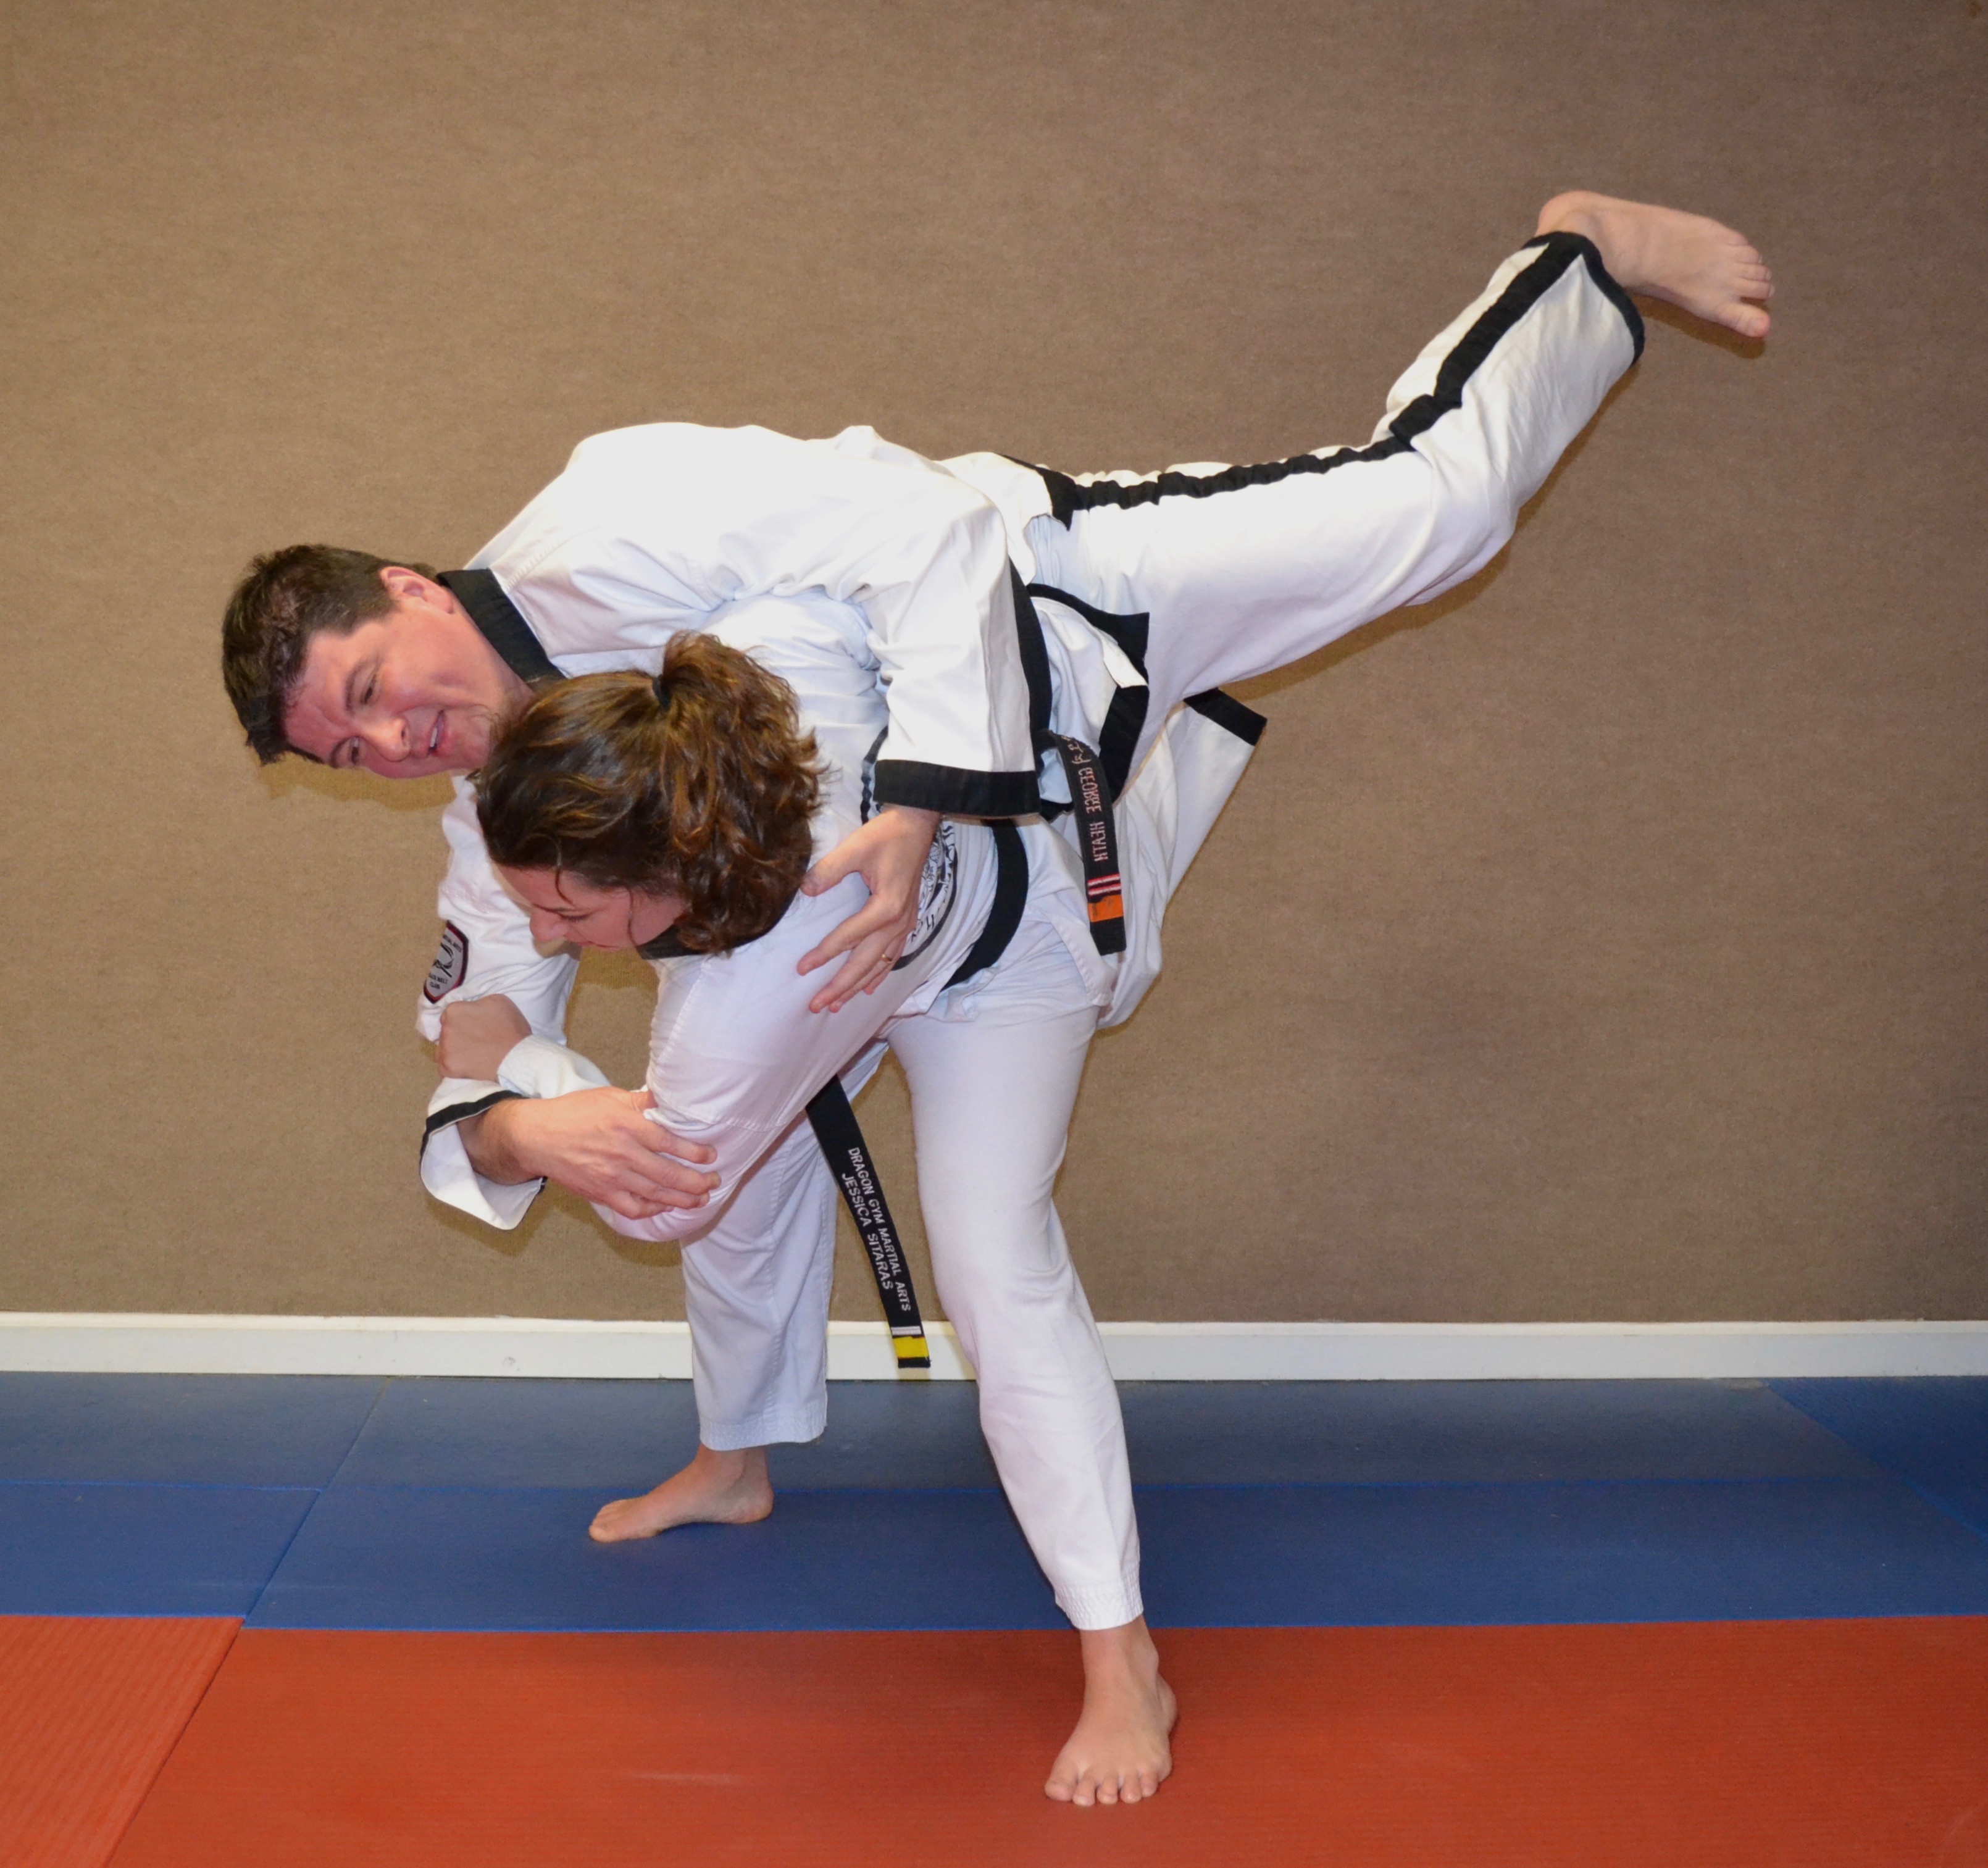 Martial Arts Technique being demonstrated